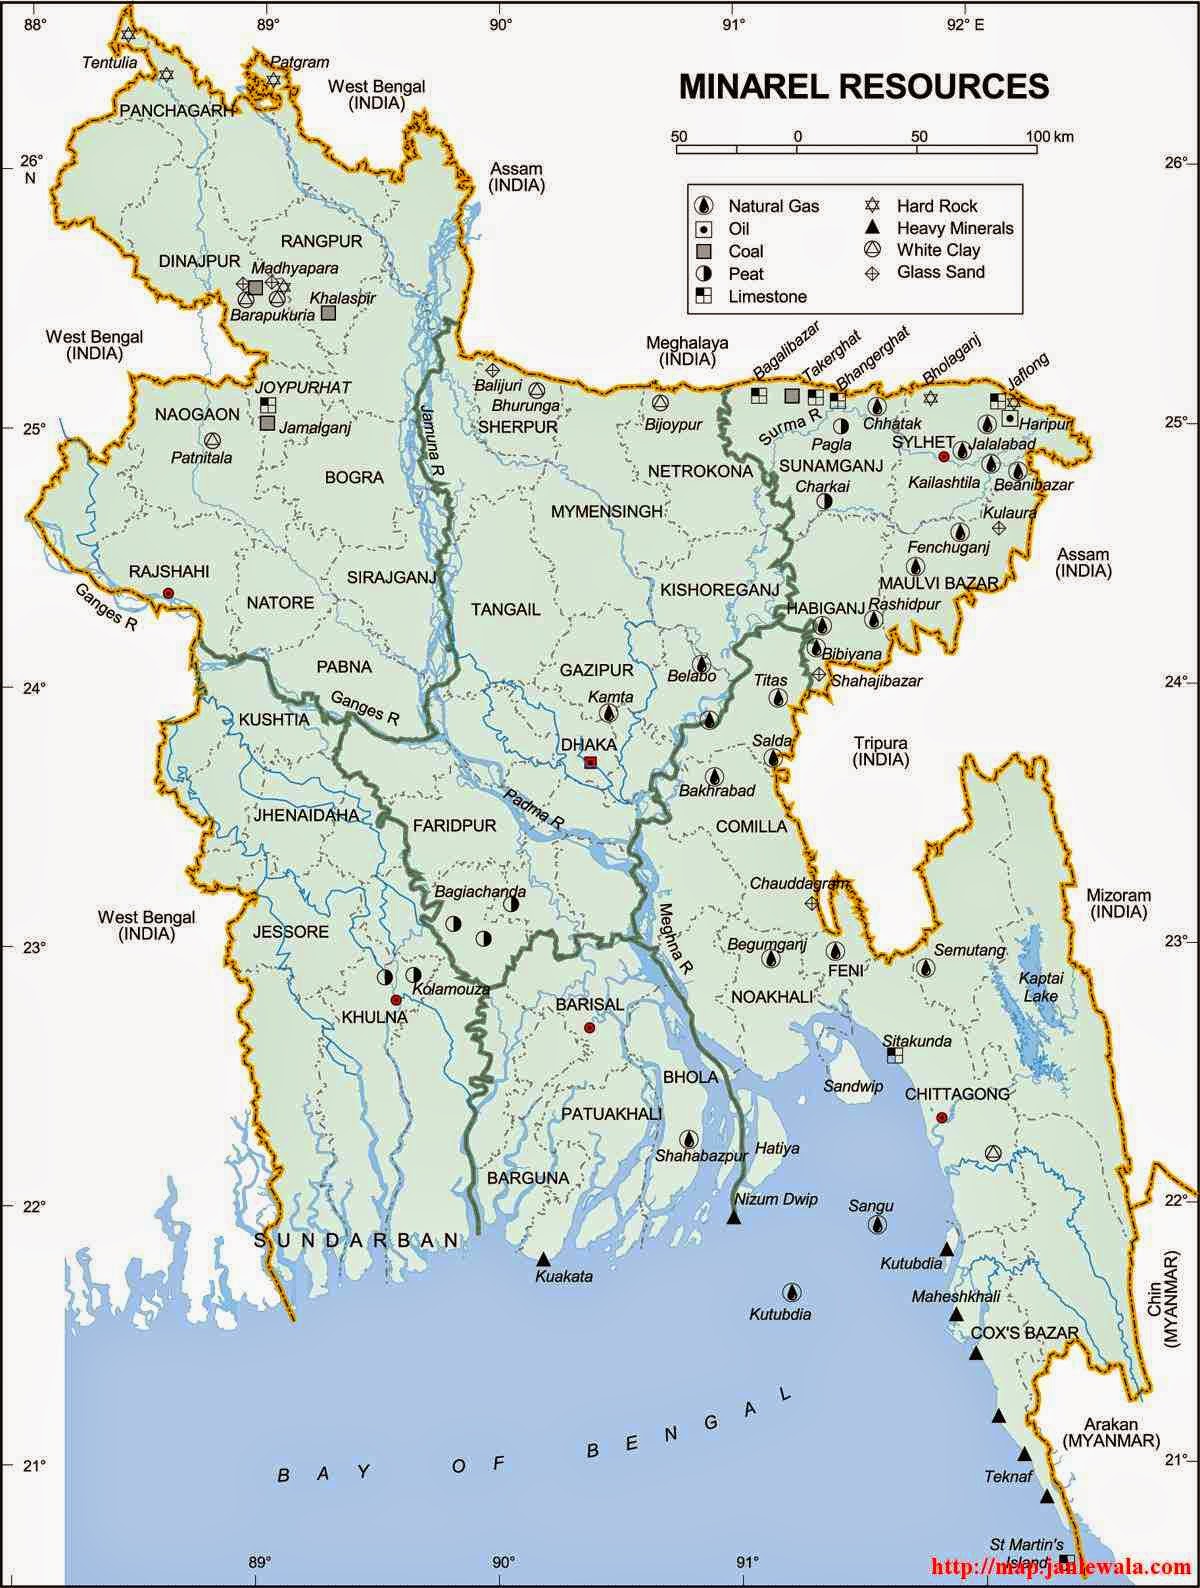 Mineral Resources Map of Bangladesh